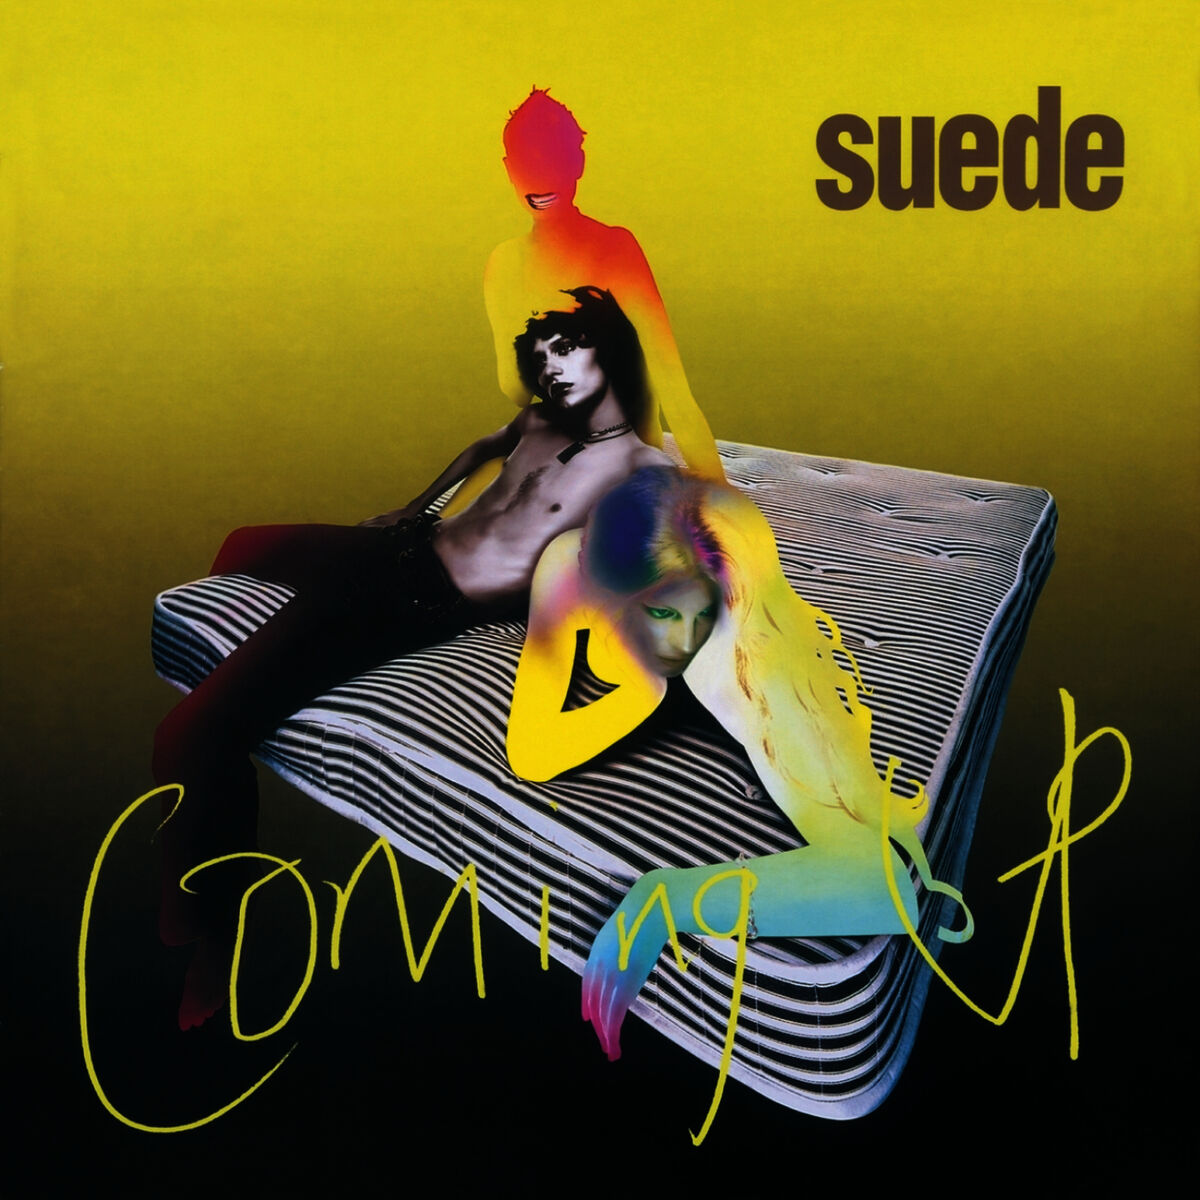 Suede - Coming Up (Remastered): lyrics and songs | Deezer